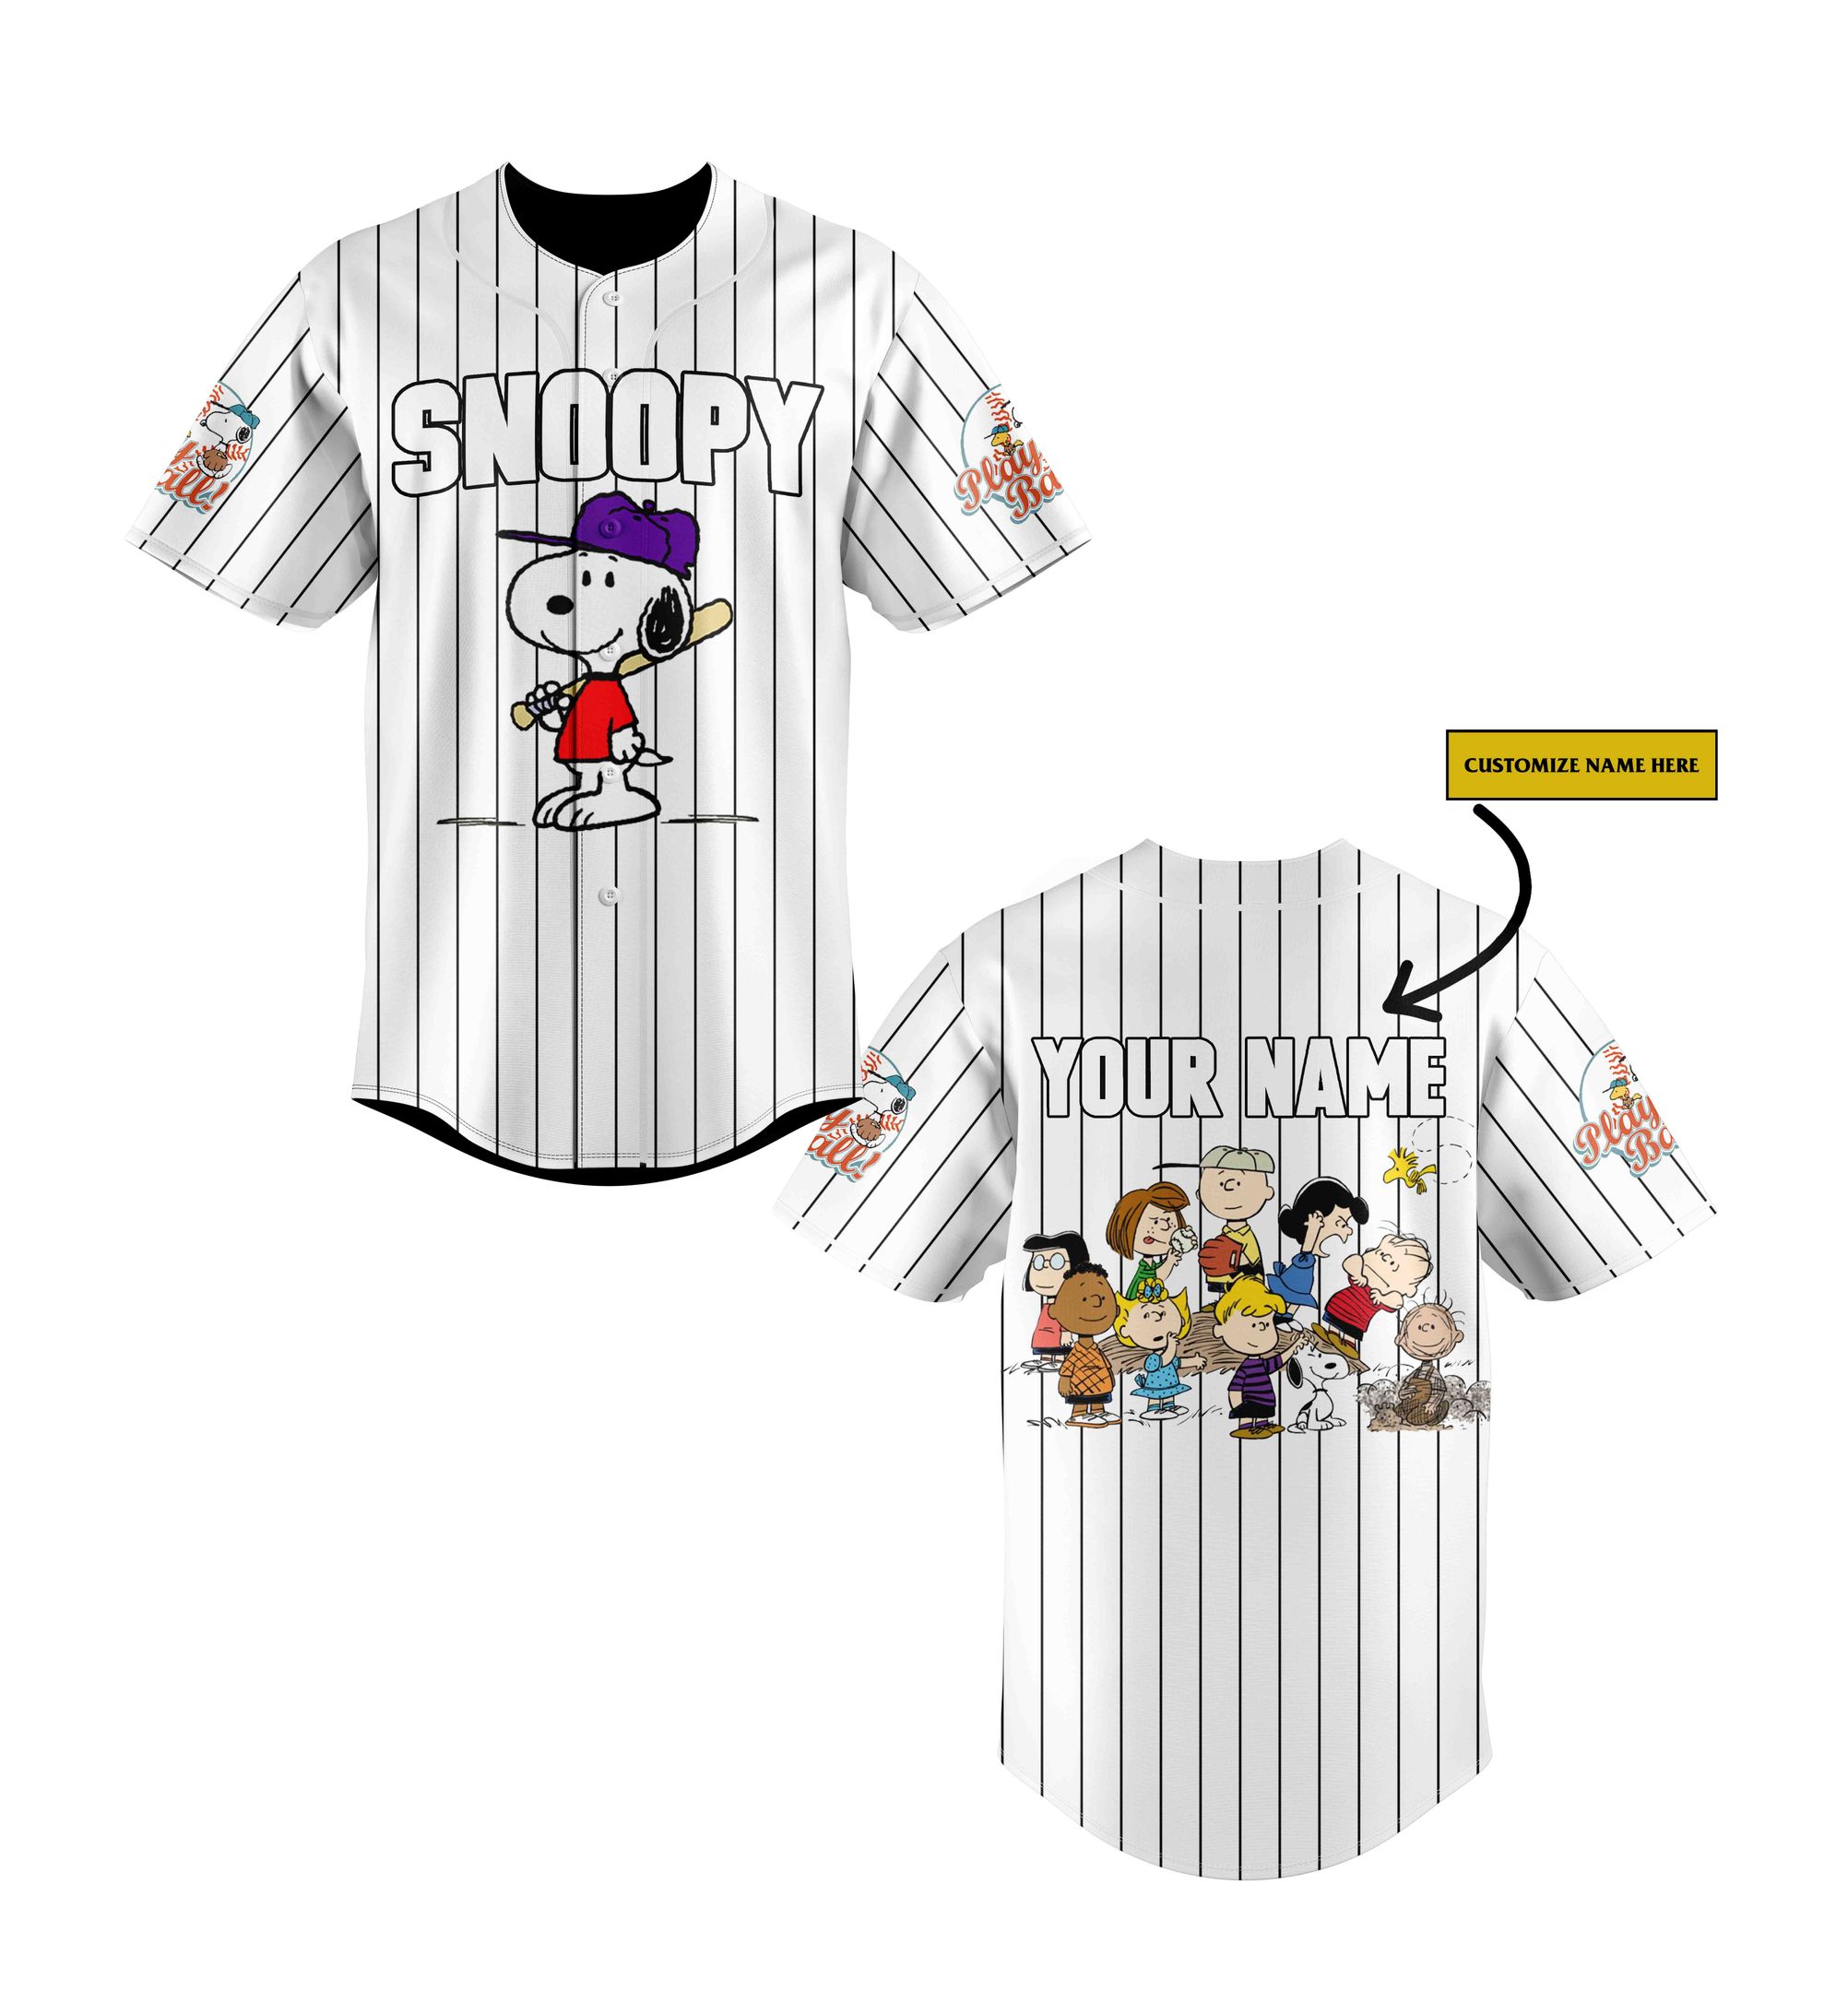 Snoopy and friends custom name baseball jersey